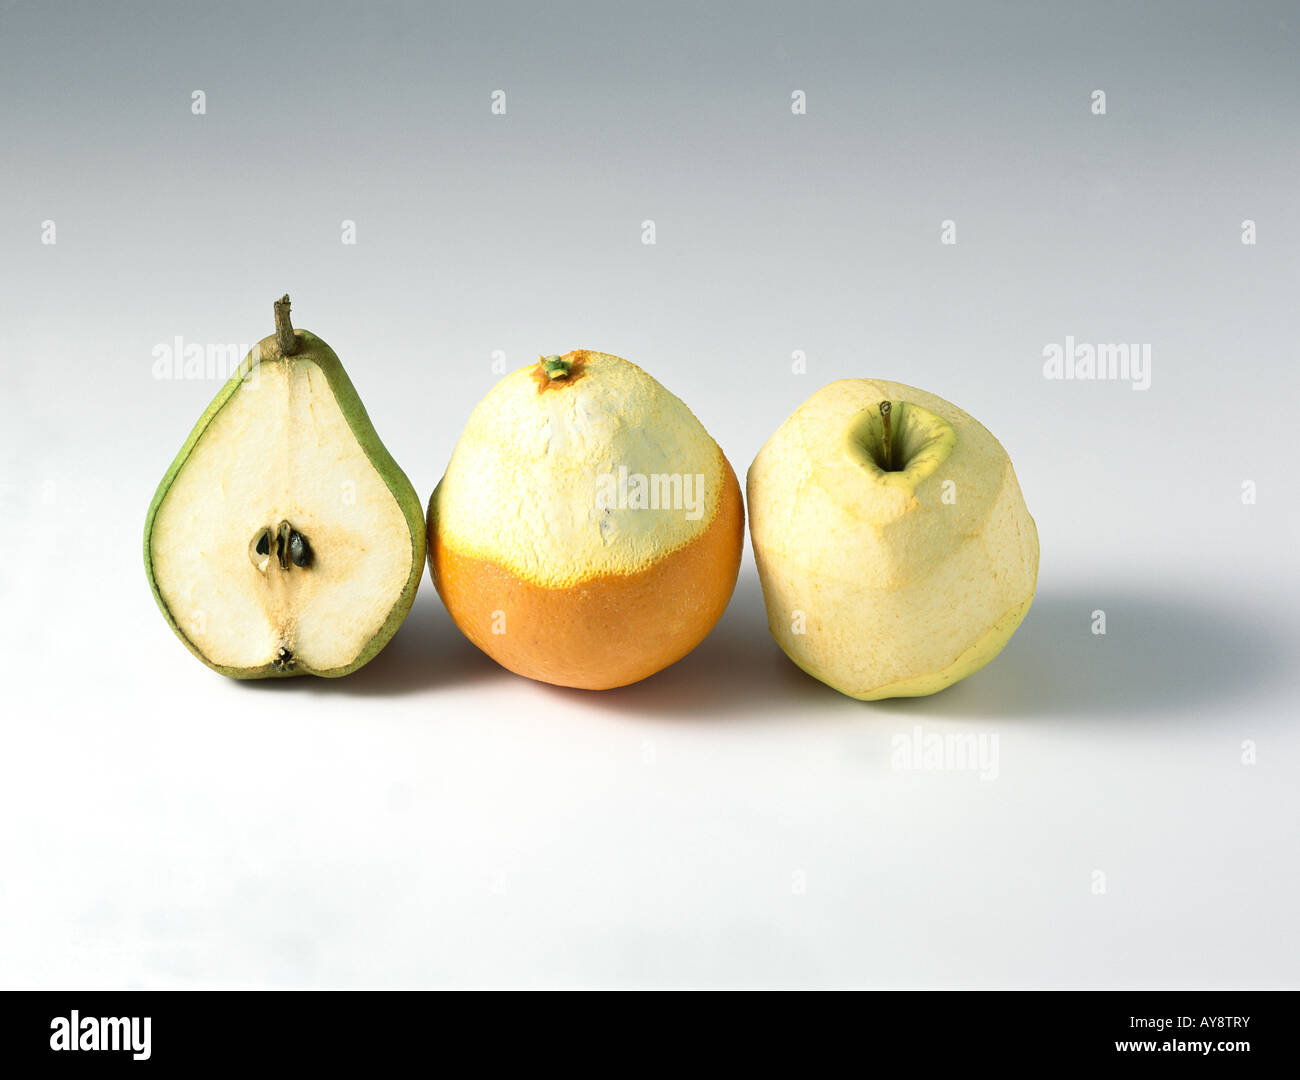 Pear, orange, and apple in a row, all partially peeled Stock Photo